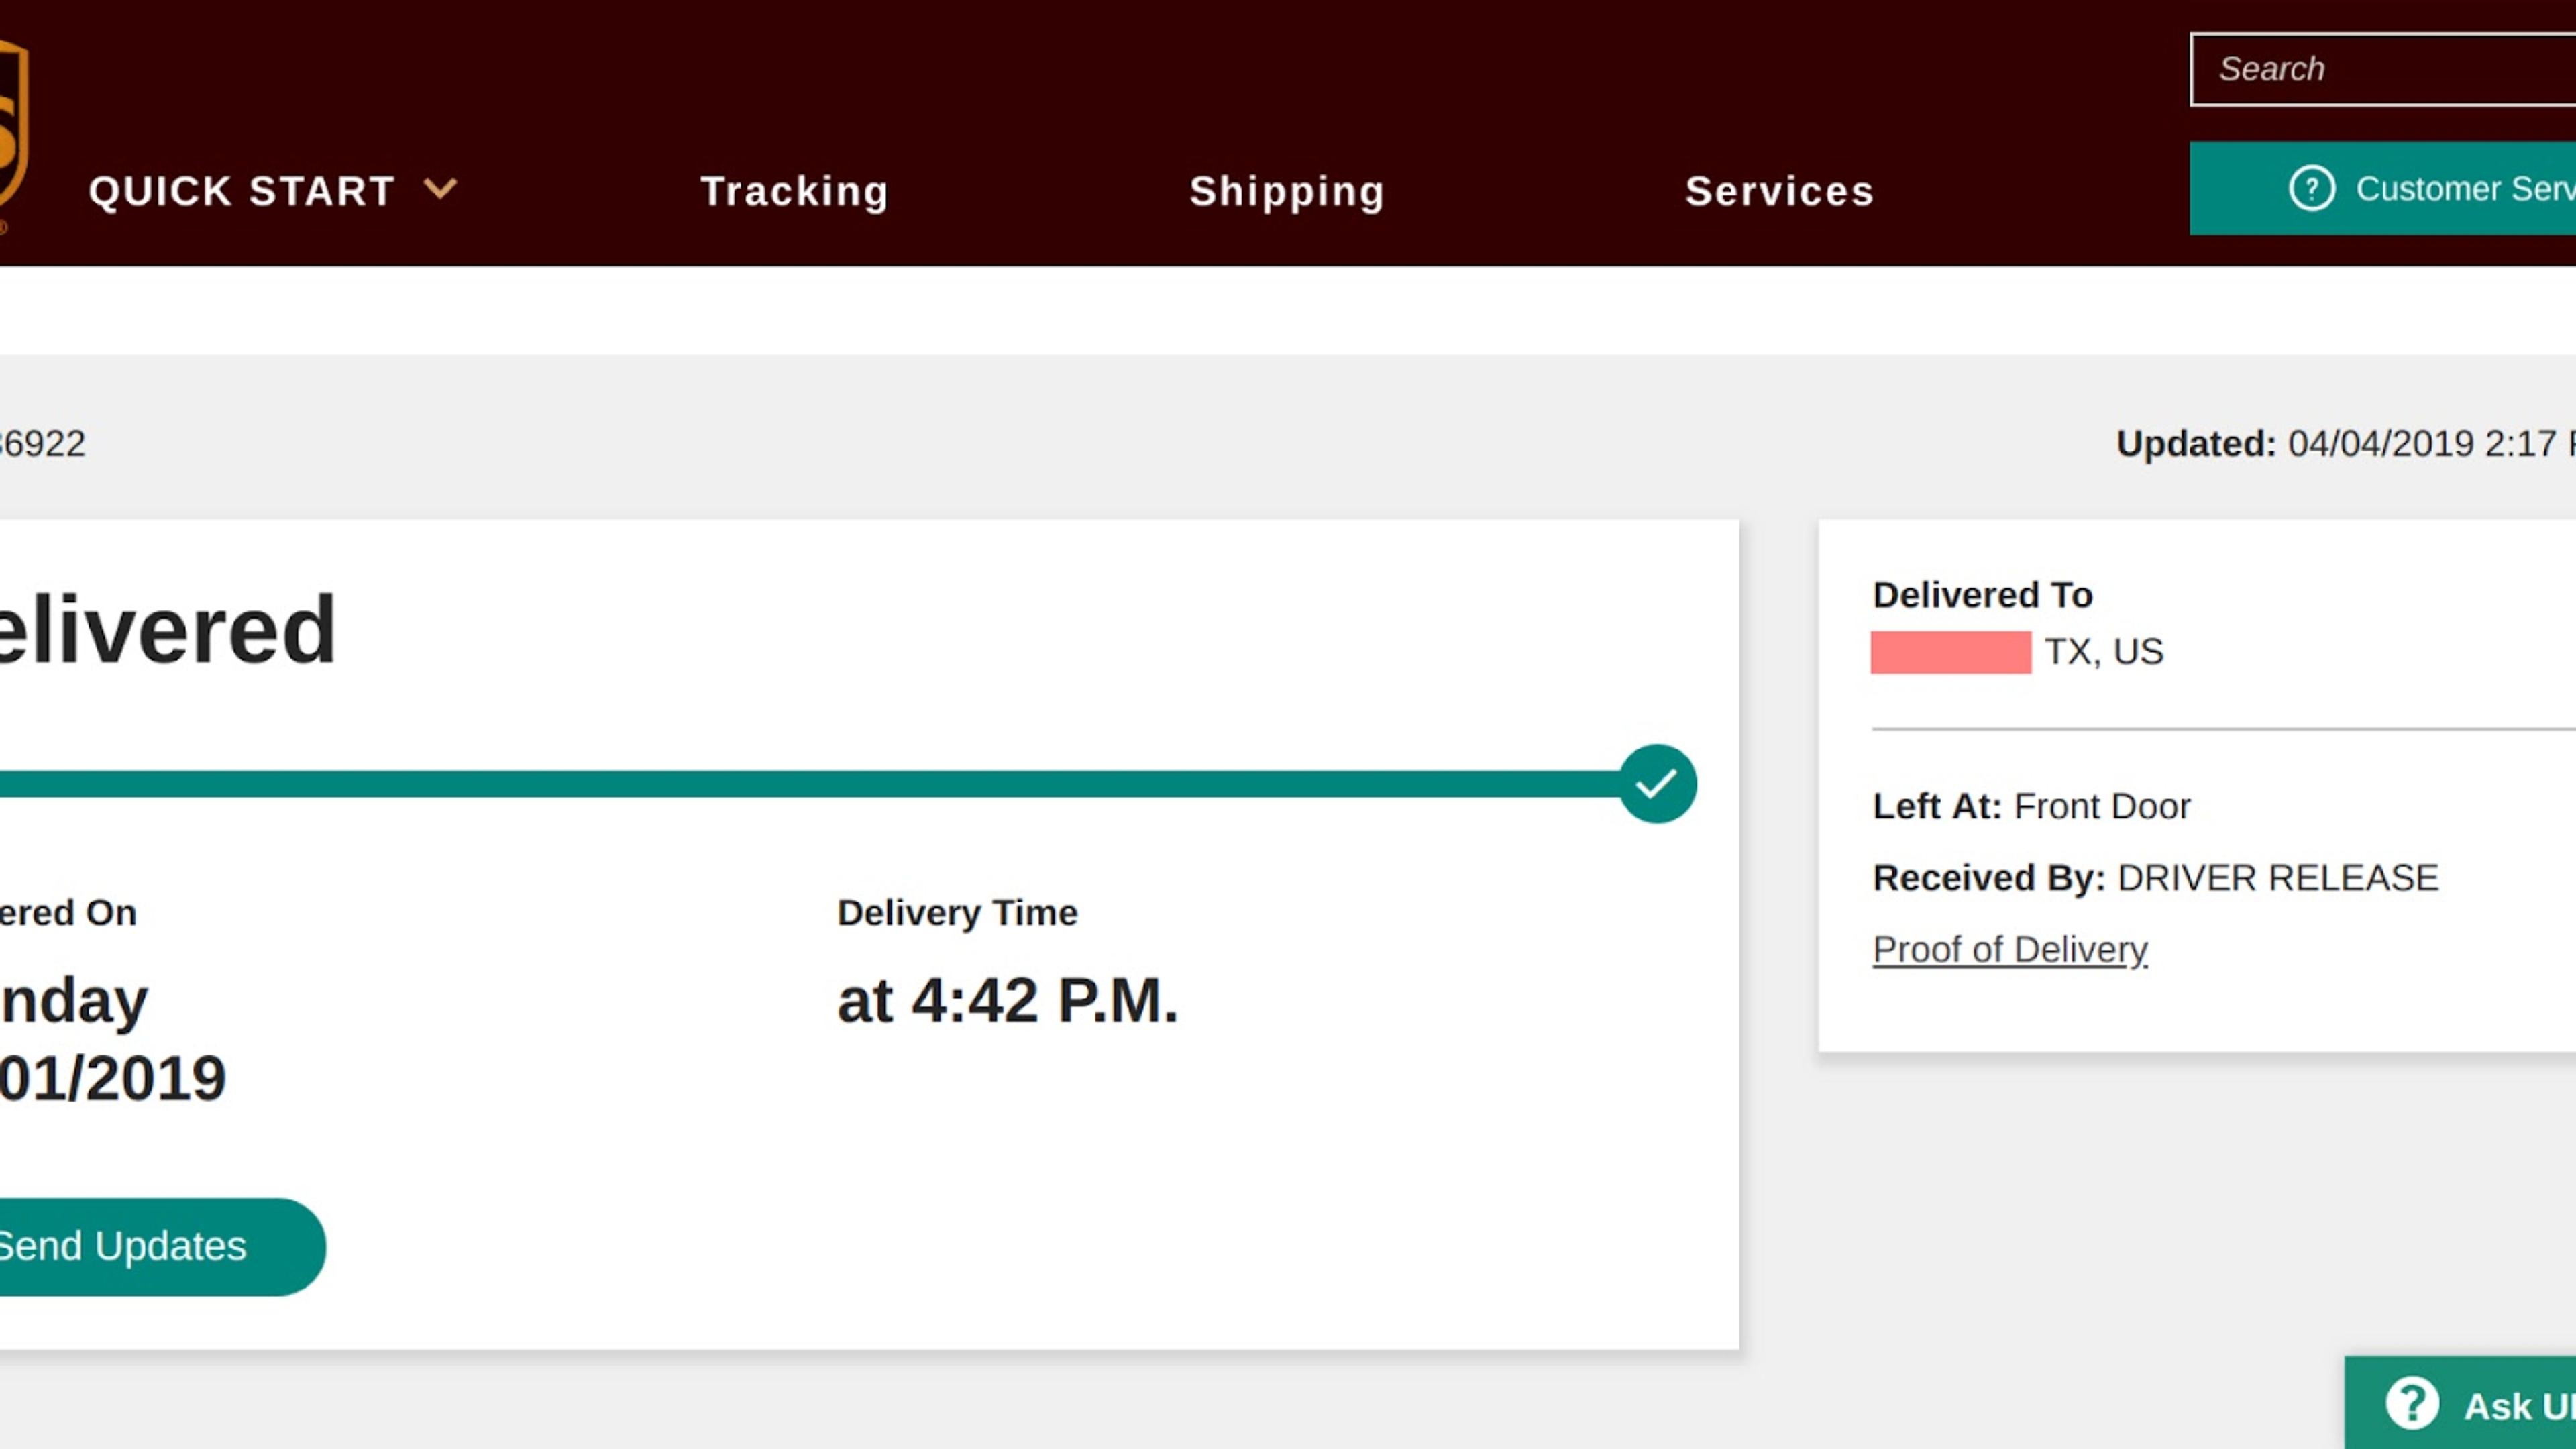 How Accurate Is UPS Tracking Information?